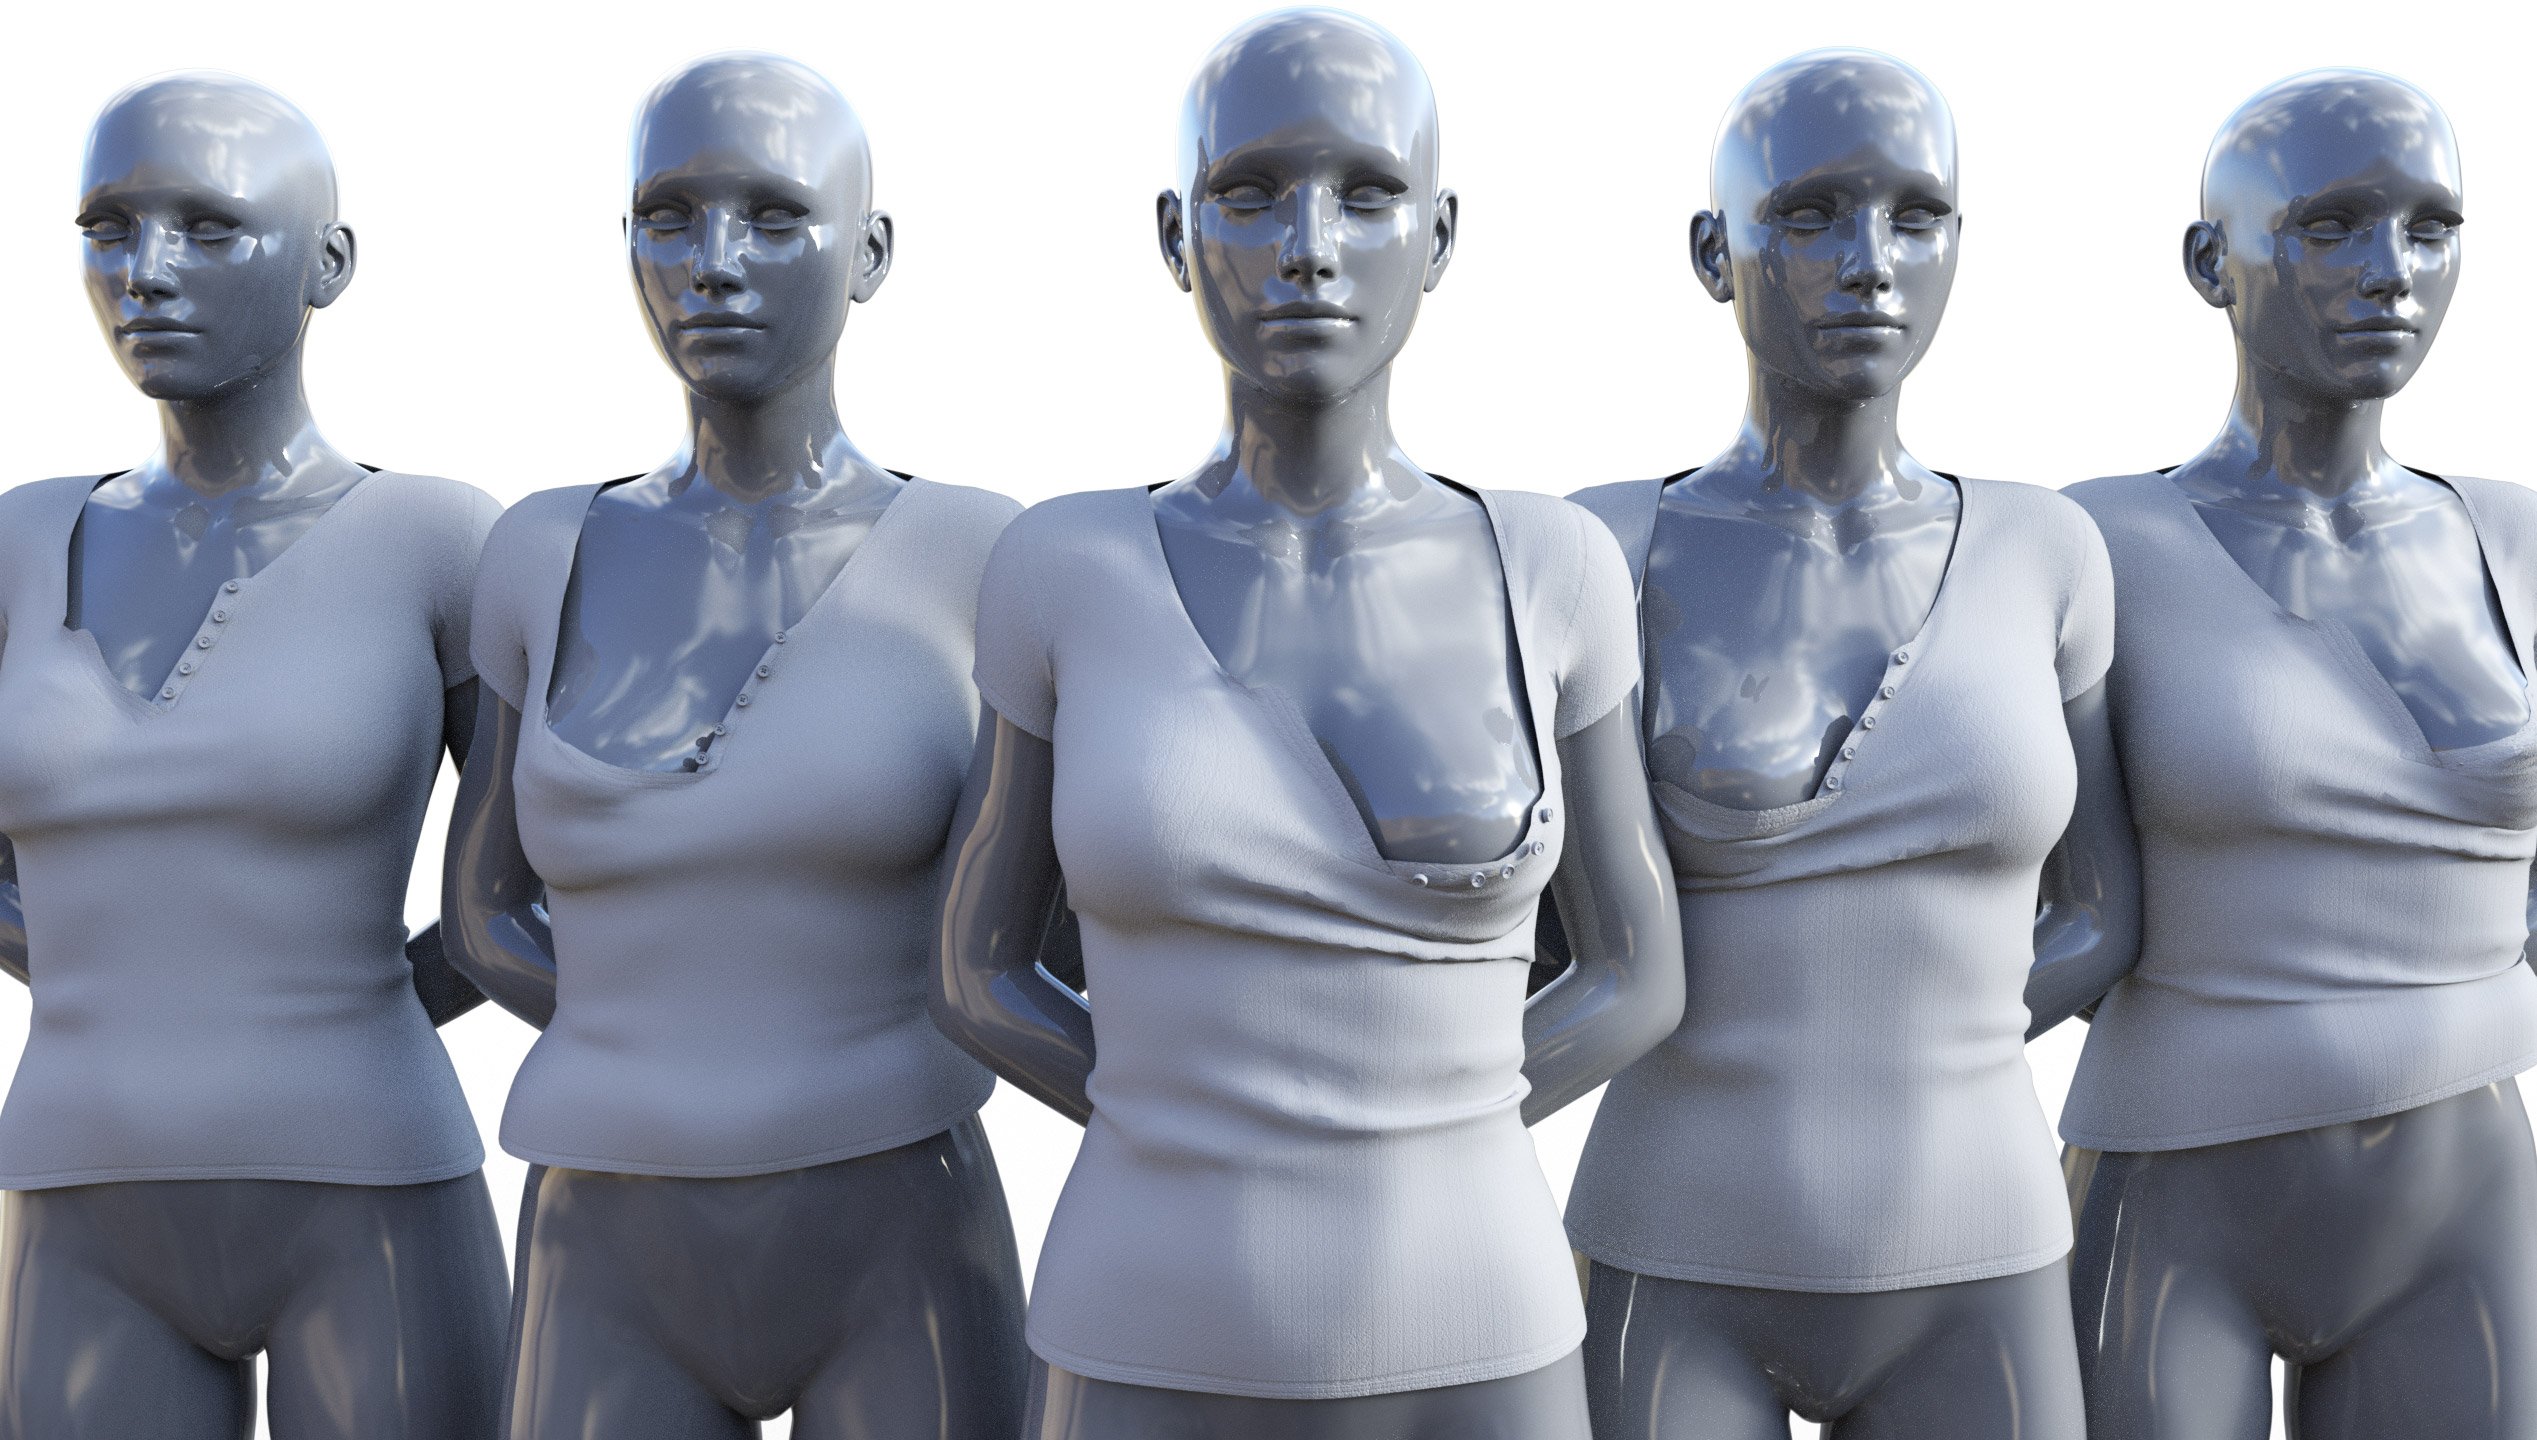 i13 3 Stylish Tops for the Genesis 3 Female(s) by: ironman13, 3D Models by Daz 3D